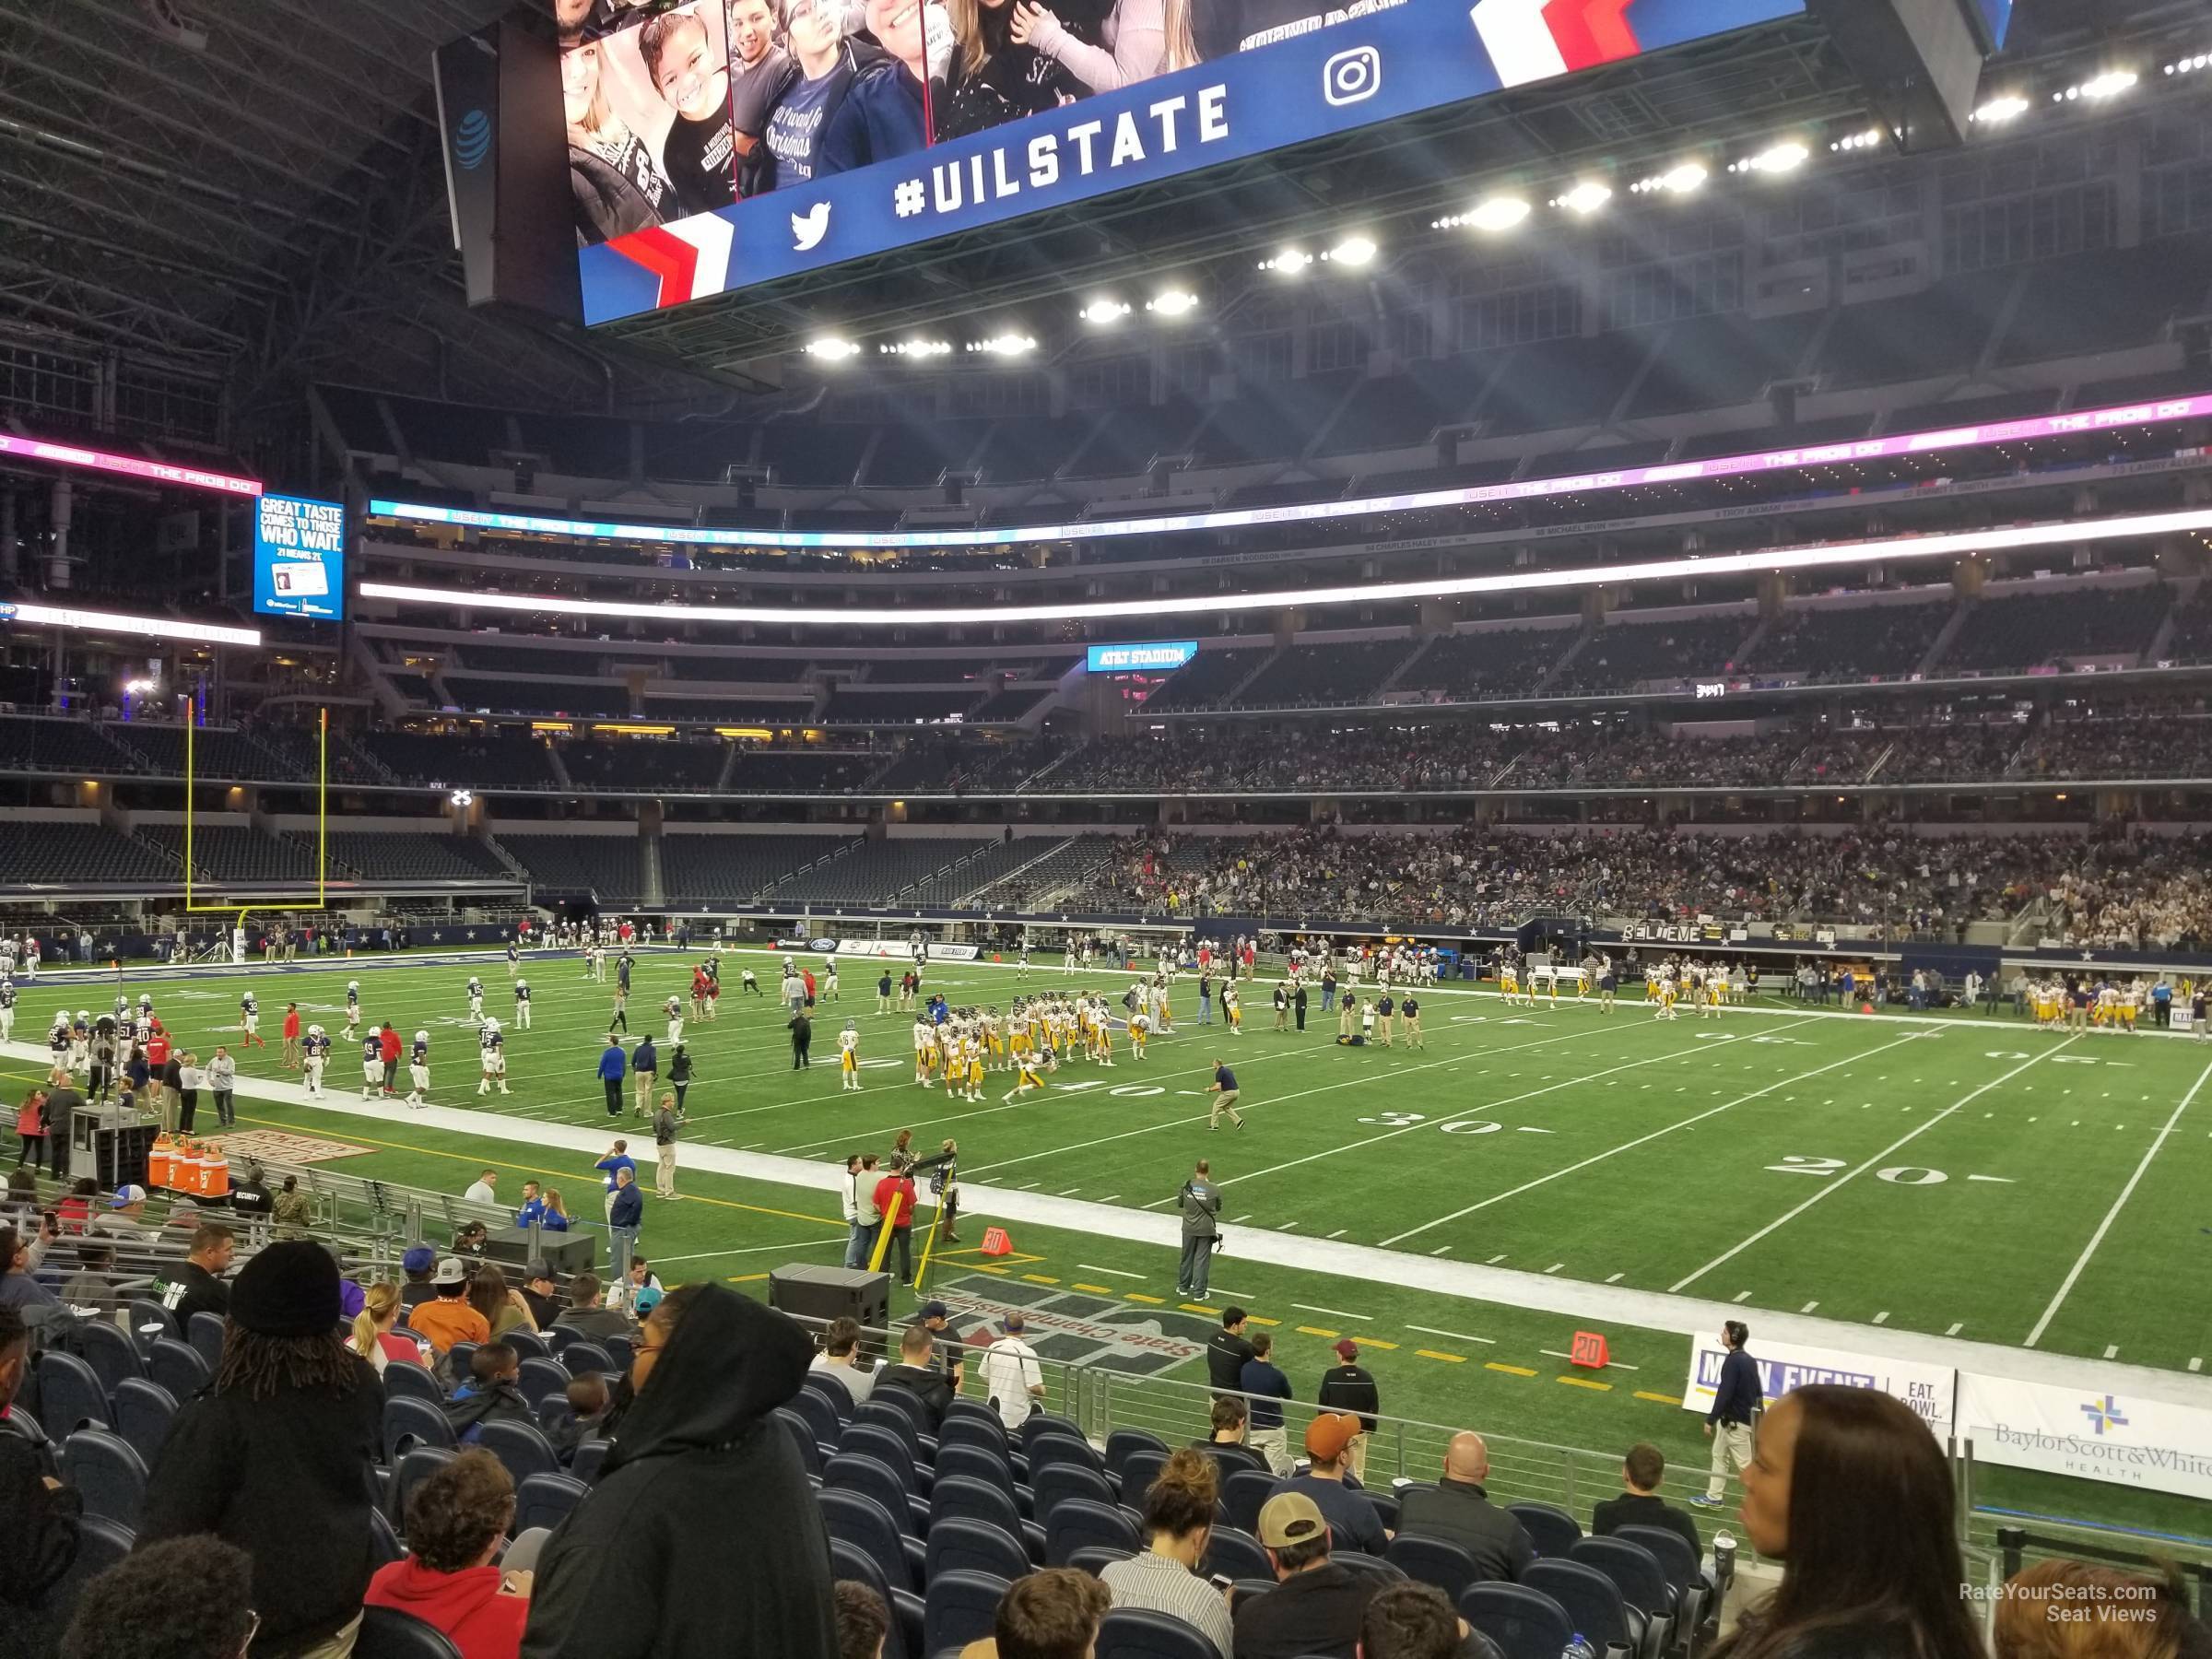 section c107, row 12 seat view  for football - at&t stadium (cowboys stadium)